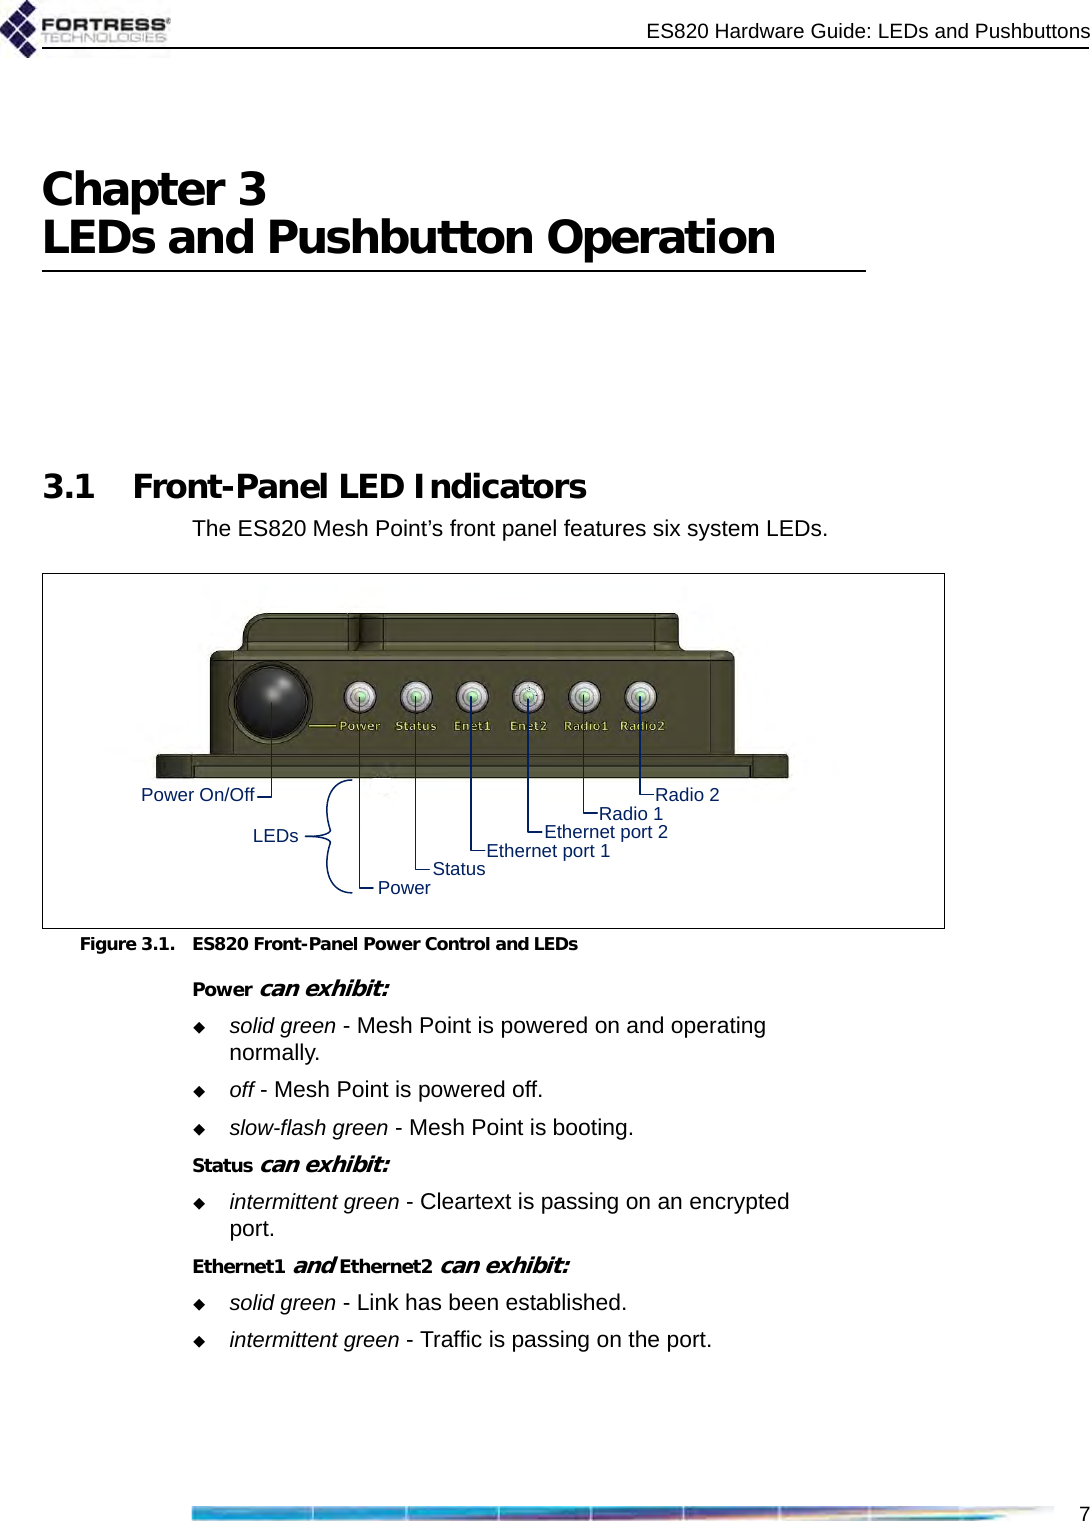 ES820 Hardware Guide: LEDs and Pushbuttons7Chapter 3LEDs and Pushbutton Operation3.1 Front-Panel LED IndicatorsThe ES820 Mesh Point’s front panel features six system LEDs.Figure 3.1. ES820 Front-Panel Power Control and LEDsPower can exhibit:solid green - Mesh Point is powered on and operating normally.off - Mesh Point is powered off.slow-flash green - Mesh Point is booting.Status can exhibit:intermittent green - Cleartext is passing on an encrypted port.Ethernet1 and Ethernet2 can exhibit:solid green - Link has been established.intermittent green - Traffic is passing on the port.Radio 2Radio 1Ethernet port 1Ethernet port 2StatusPowerPower On/OffLEDs